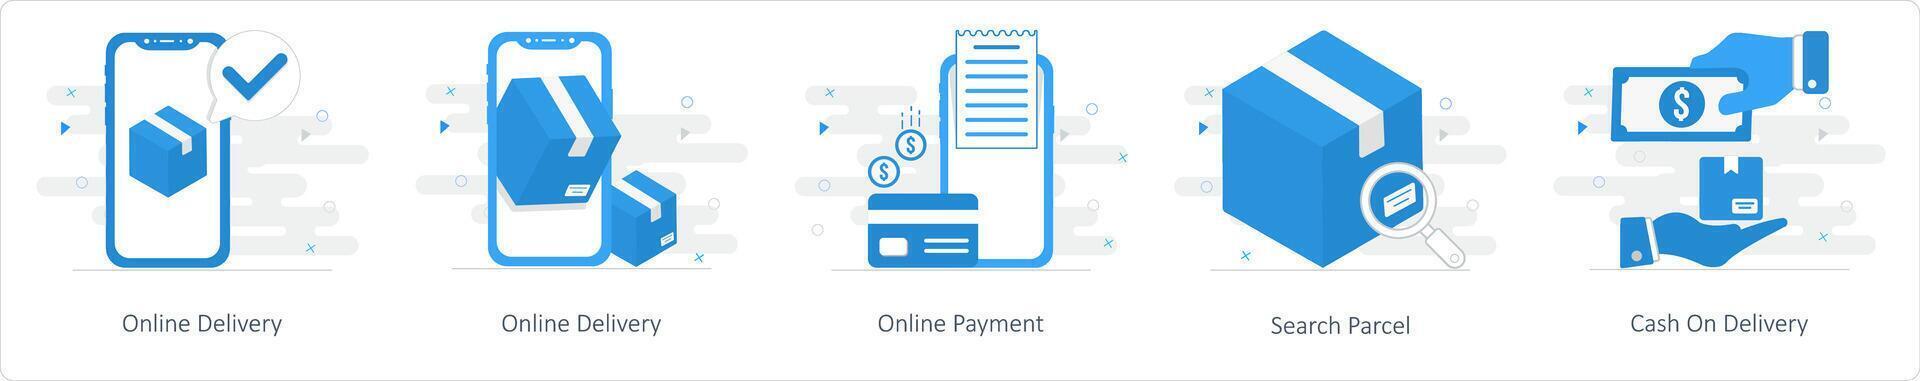 A set of 5 Mix icons as online delilvery, online payment, search parcel vector